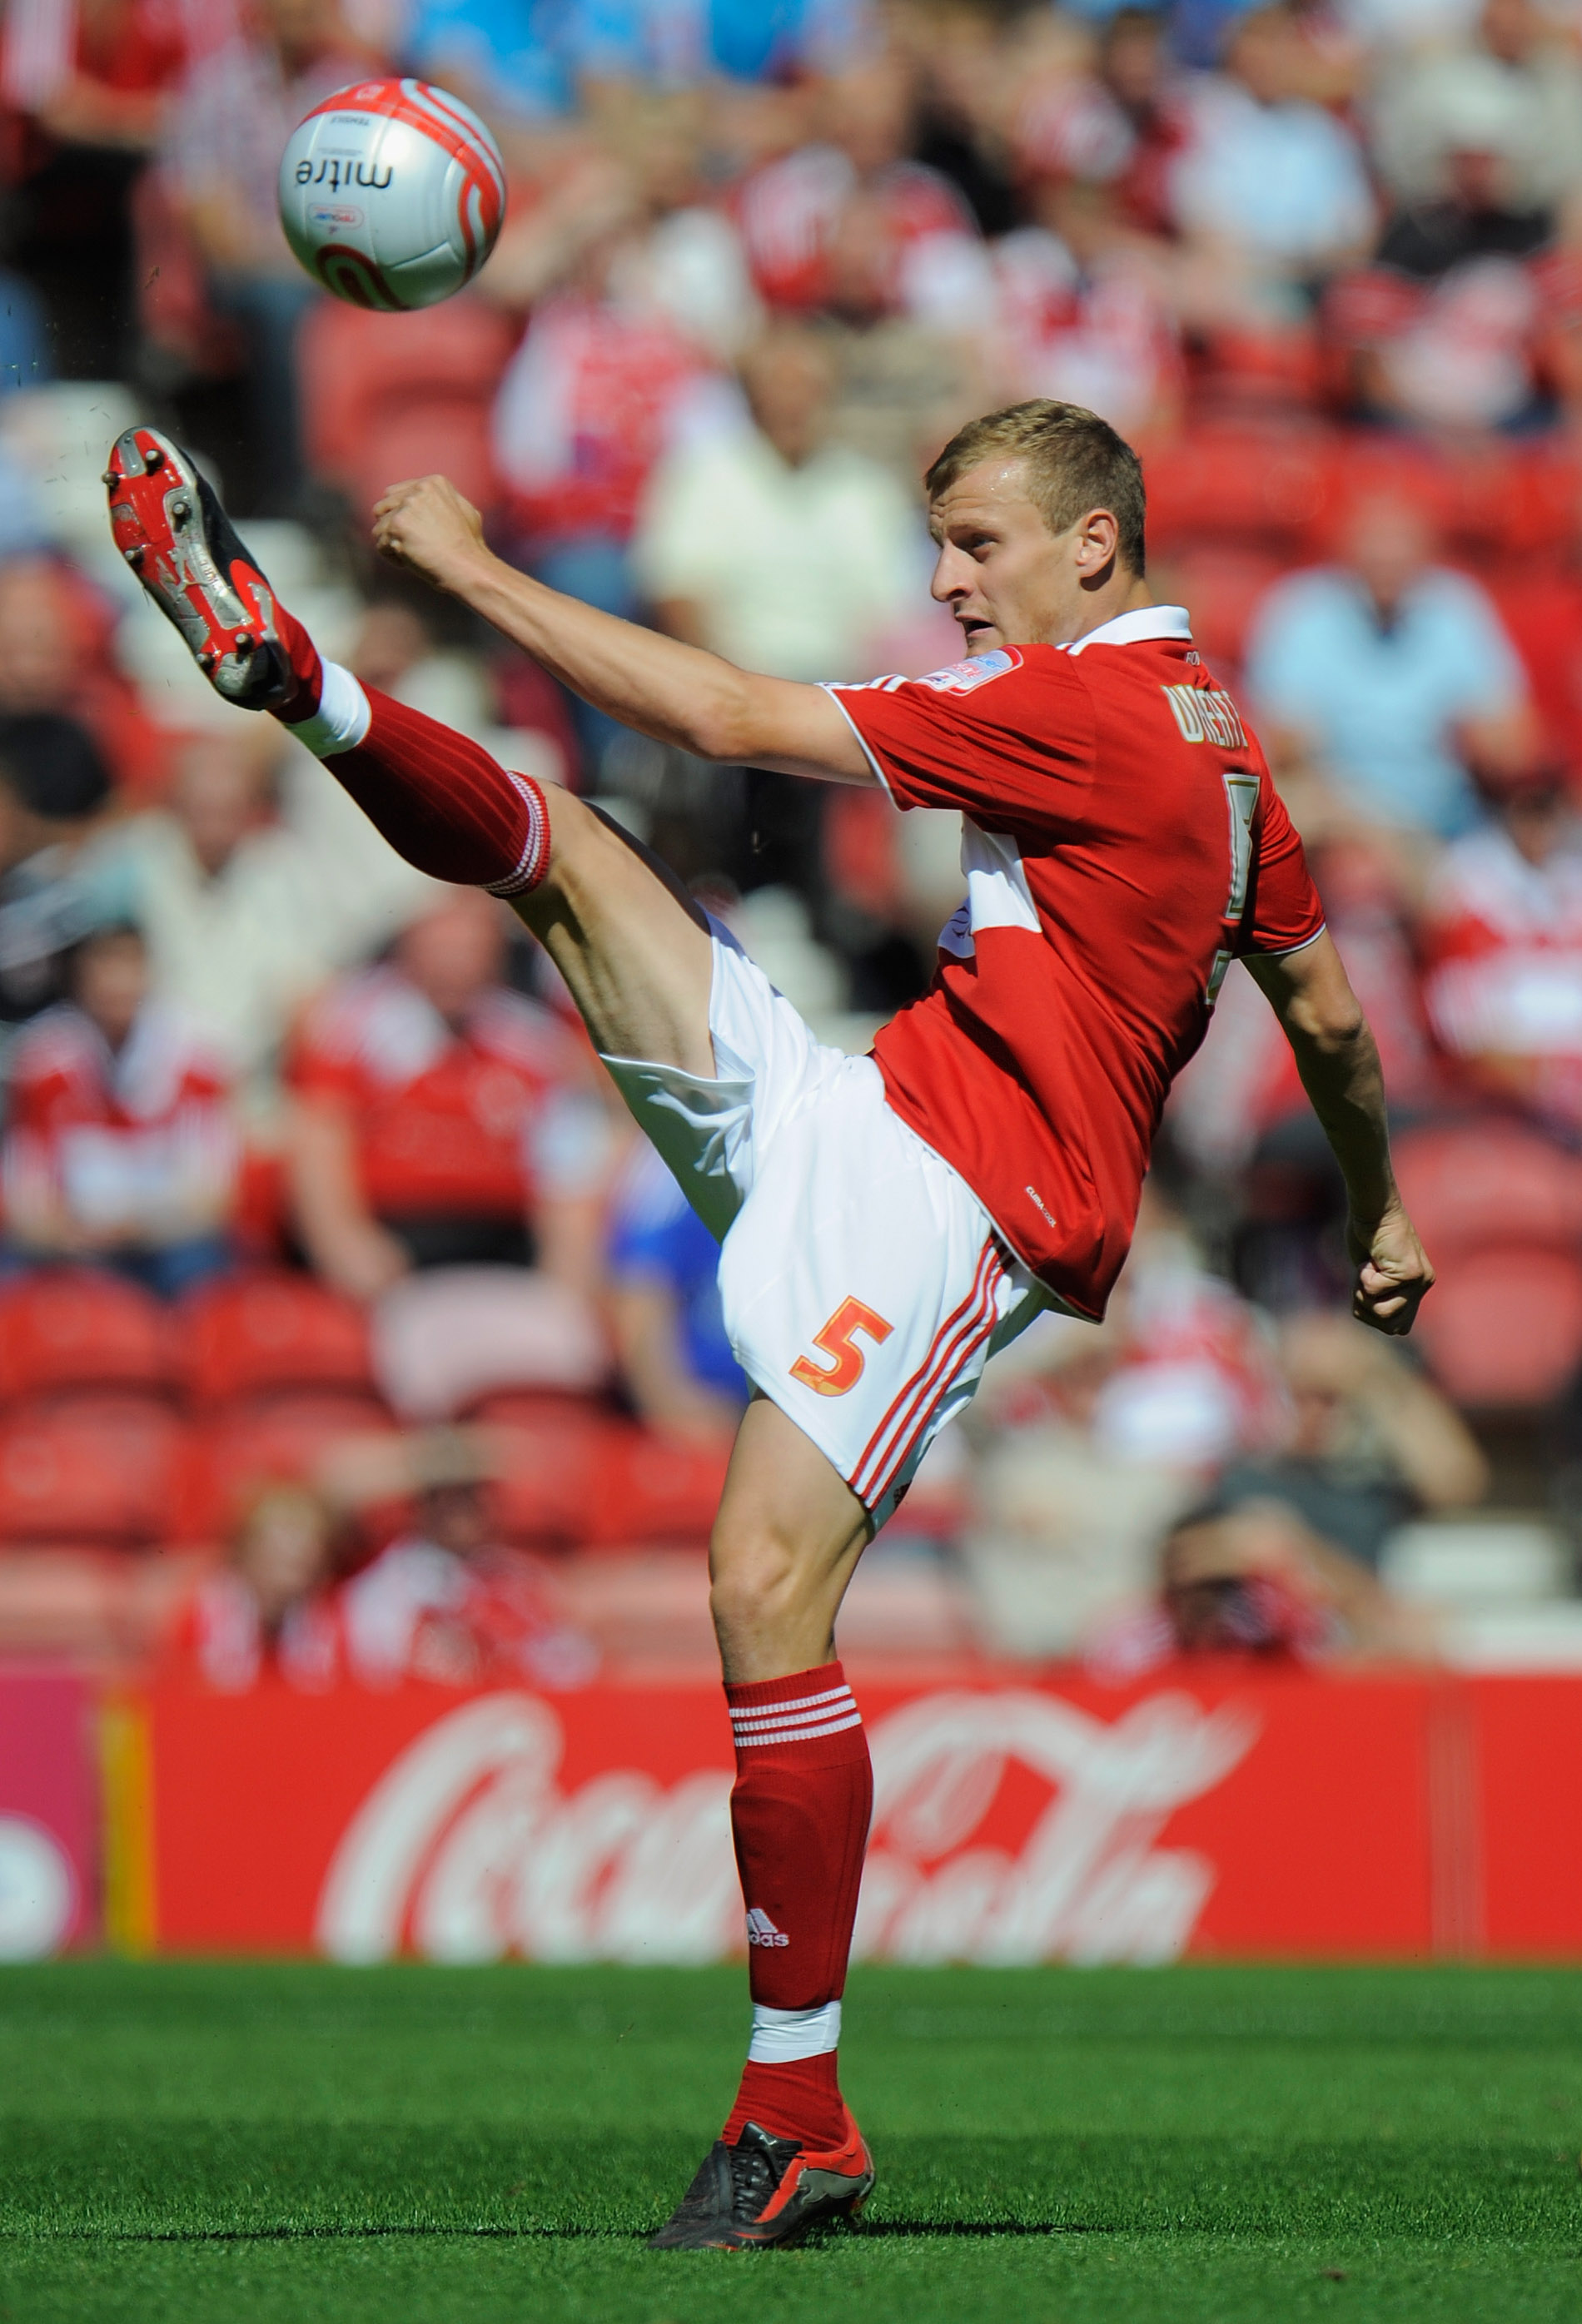 MIDDLESBROUGH, ENGLAND - AUGUST 22: David Wheater of Middlesbrough in action during the npower Championship match between Middlesbrough and Sheffield United at the Riverside Stadium on August 22, 2010 in Middlesbrough, England.  (Photo by Michael Regan/Ge